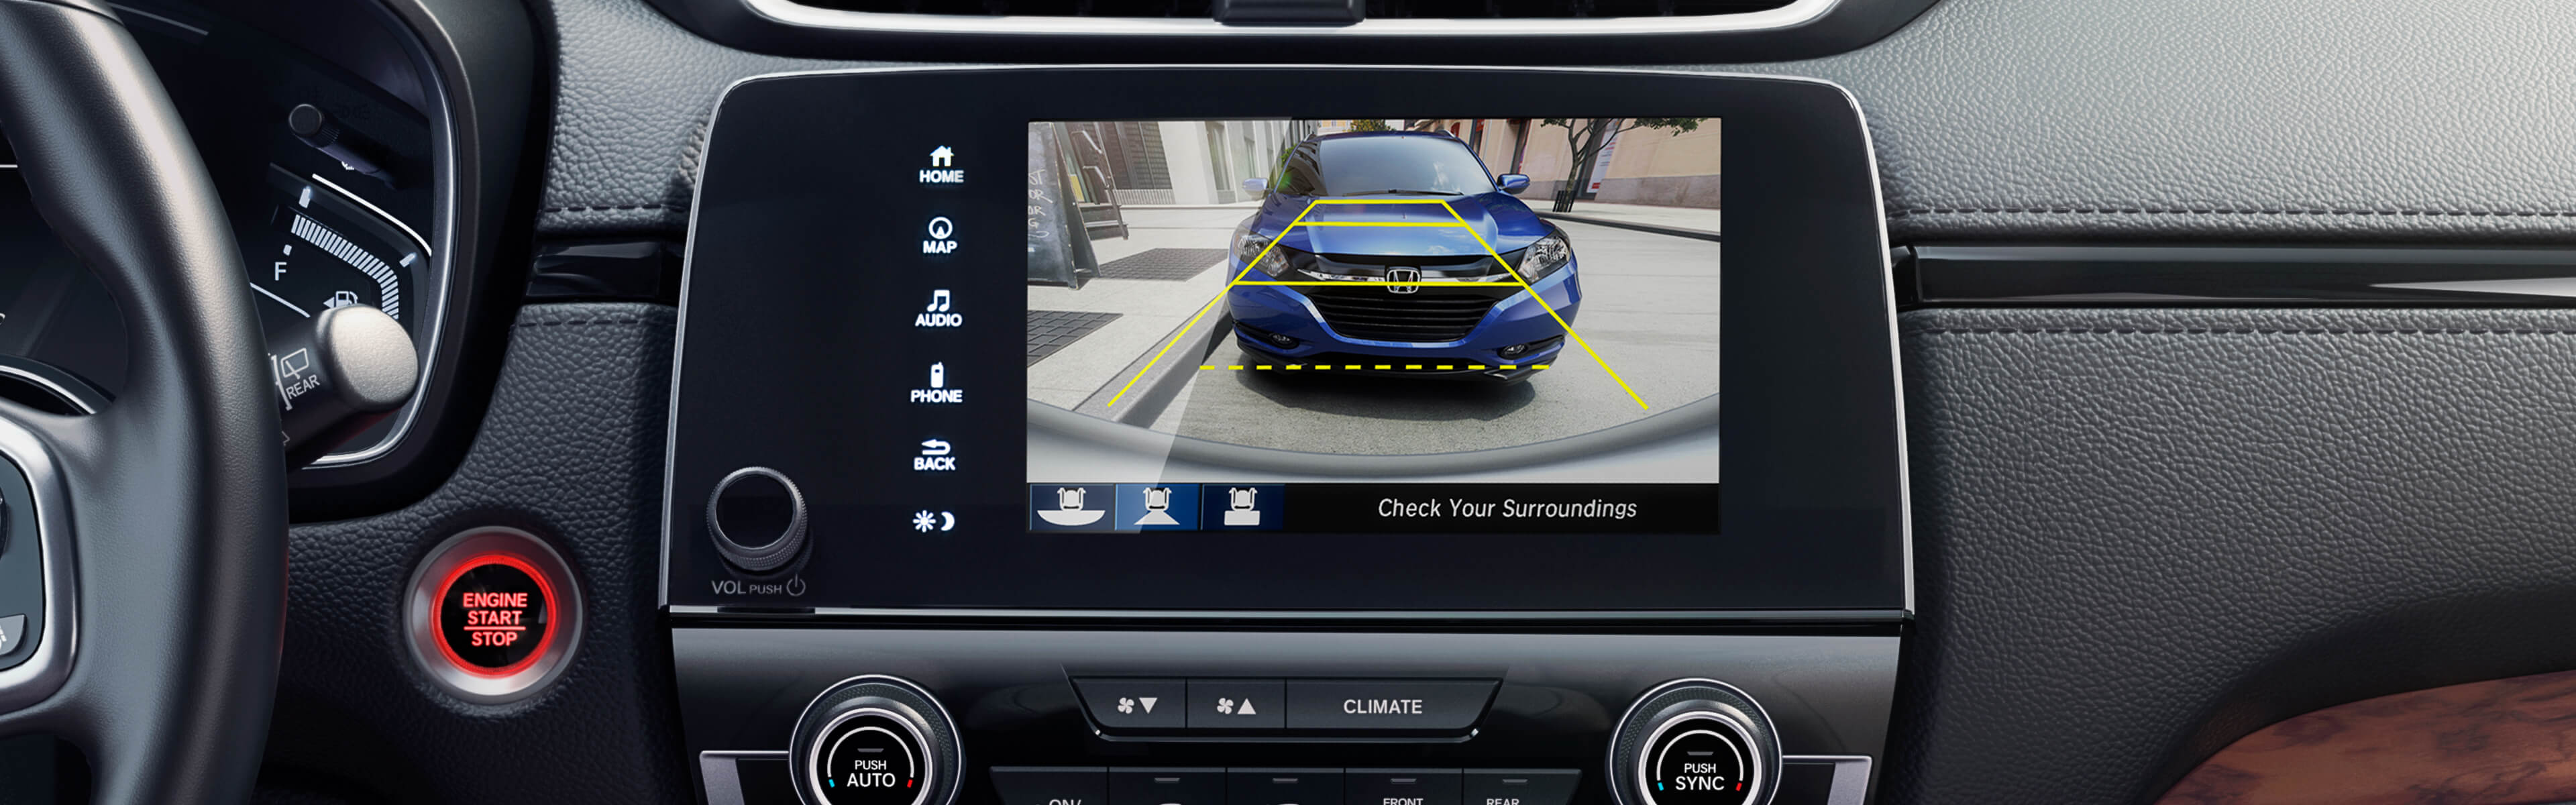 Display Audio touch-screen detail of the Multi-Angle Rearview Camera in the 2021 Honda CR-V.